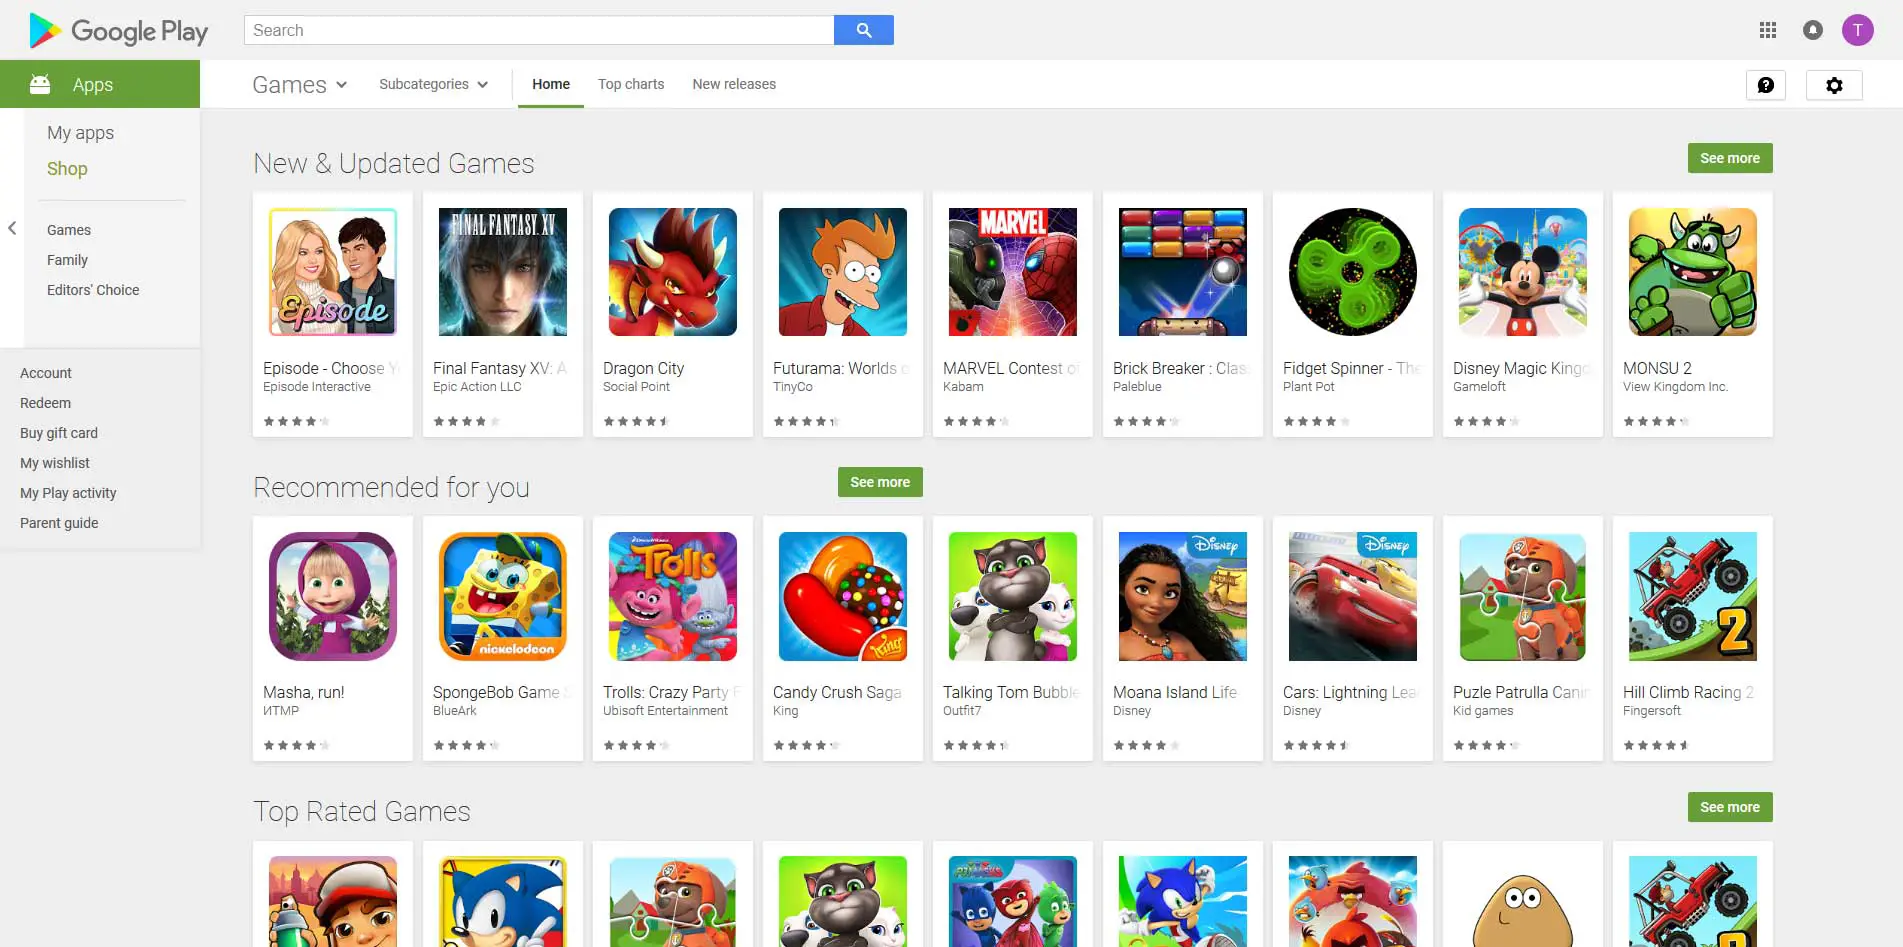 how to download google play store on computer